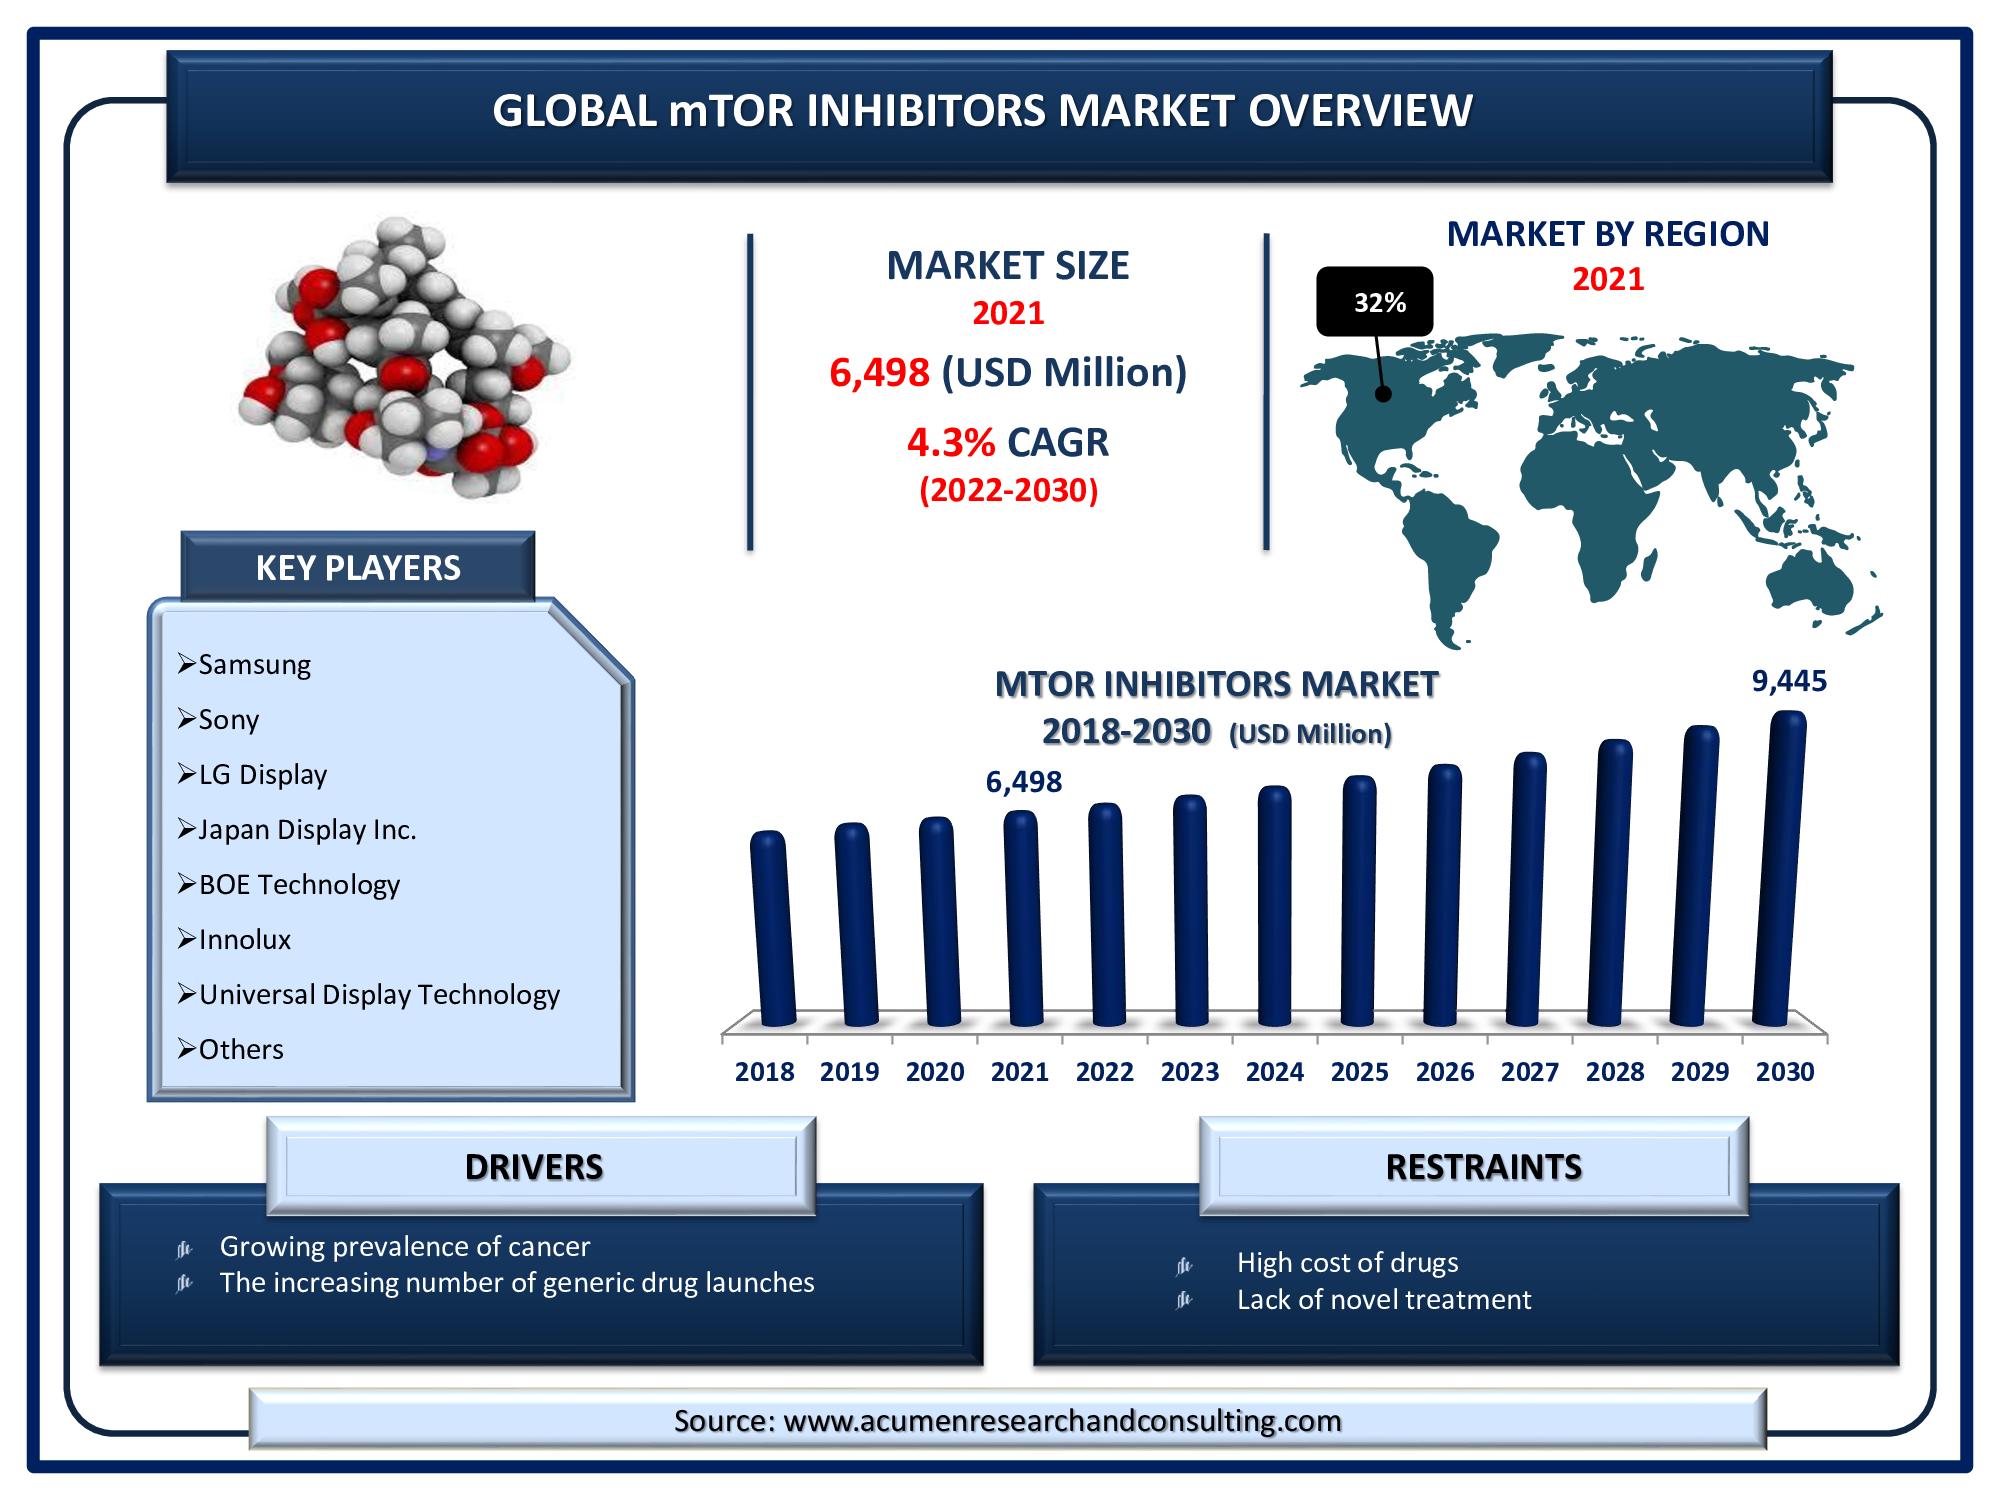 mTOR Inhibitors Market is estimated to reach USD 9,445 Mn by 2030, with a significant CAGR of 4.3%